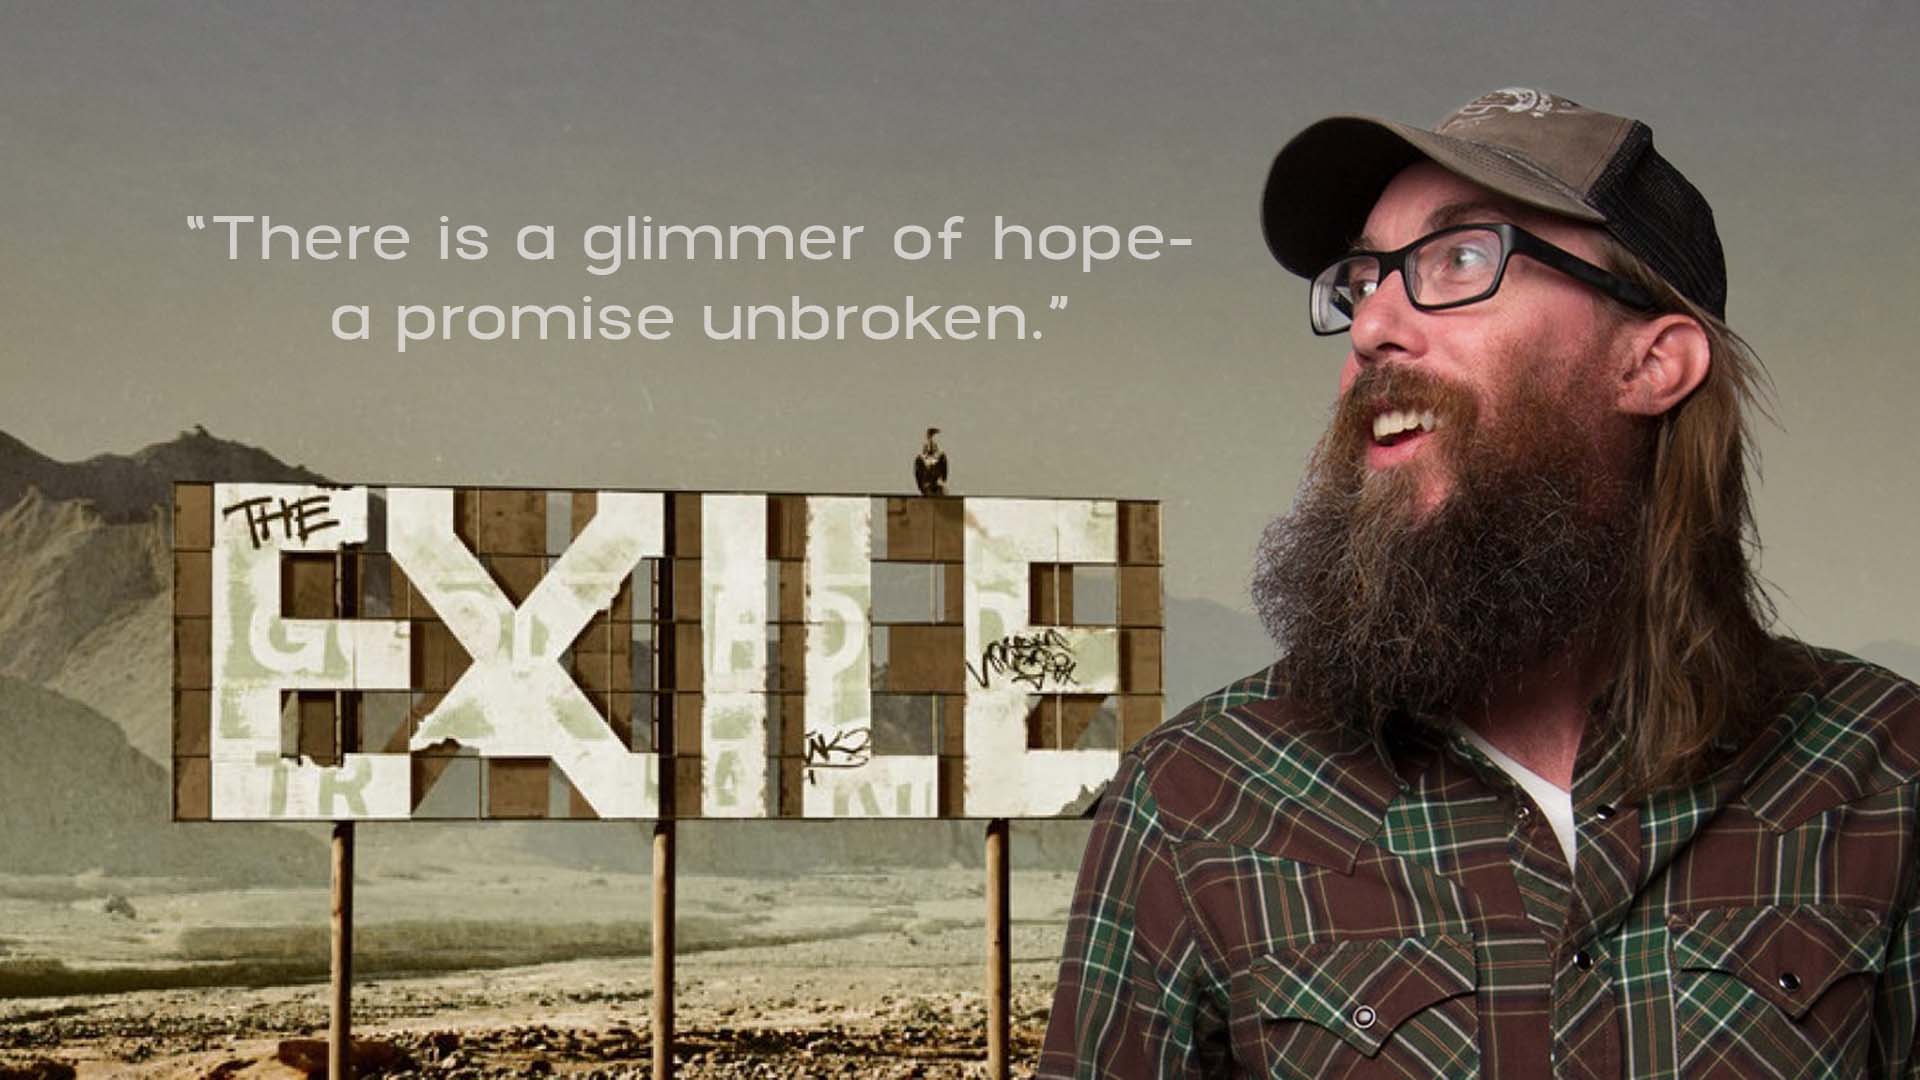 Crowder Exile Album and Devotional. "There is a glimmer of hope- a promise unbroken."